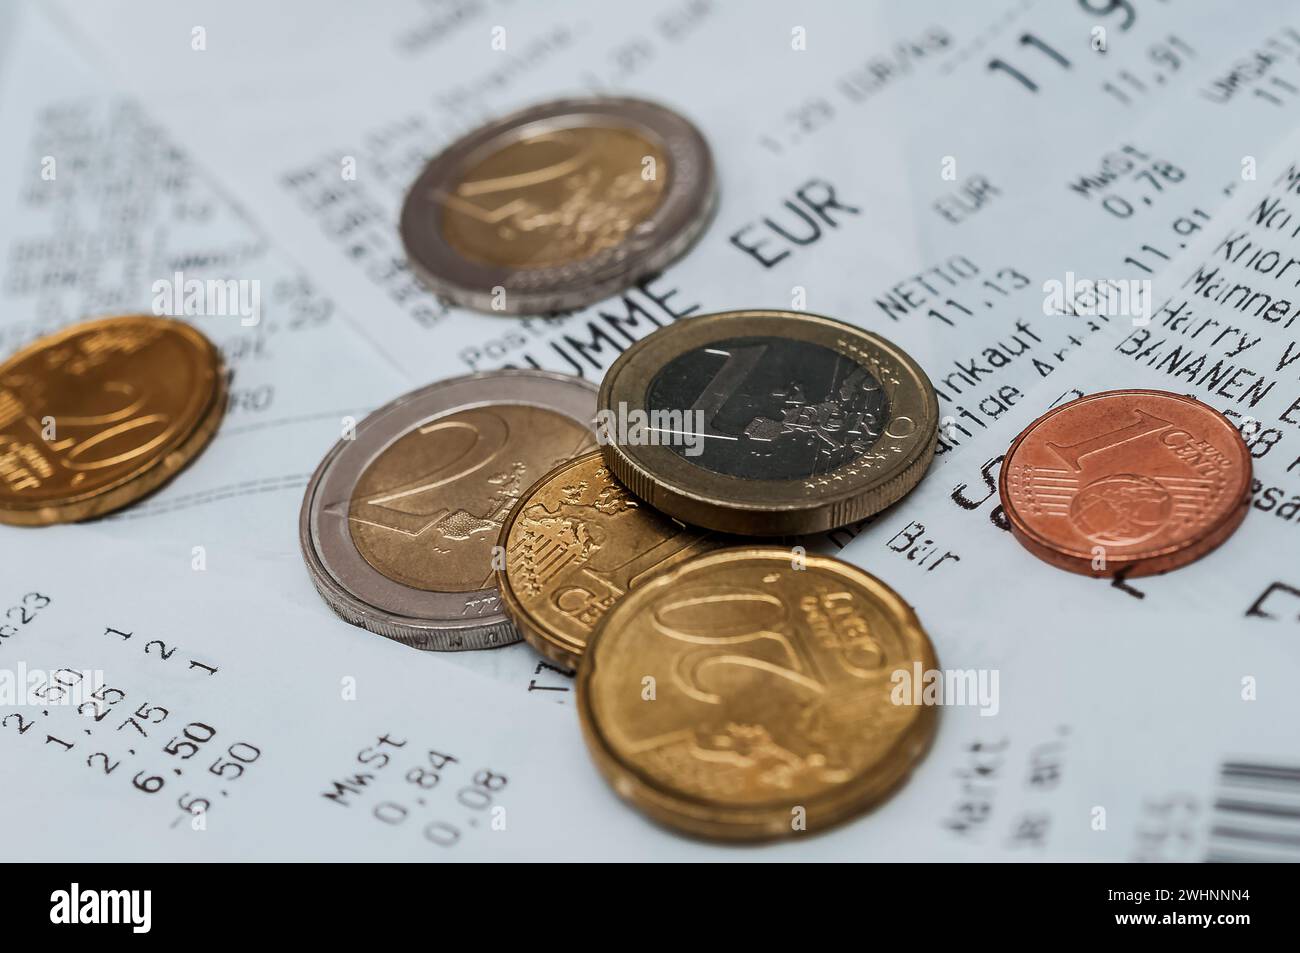 Price increases and inflation in Europe - supermarket receipts Stock Photo